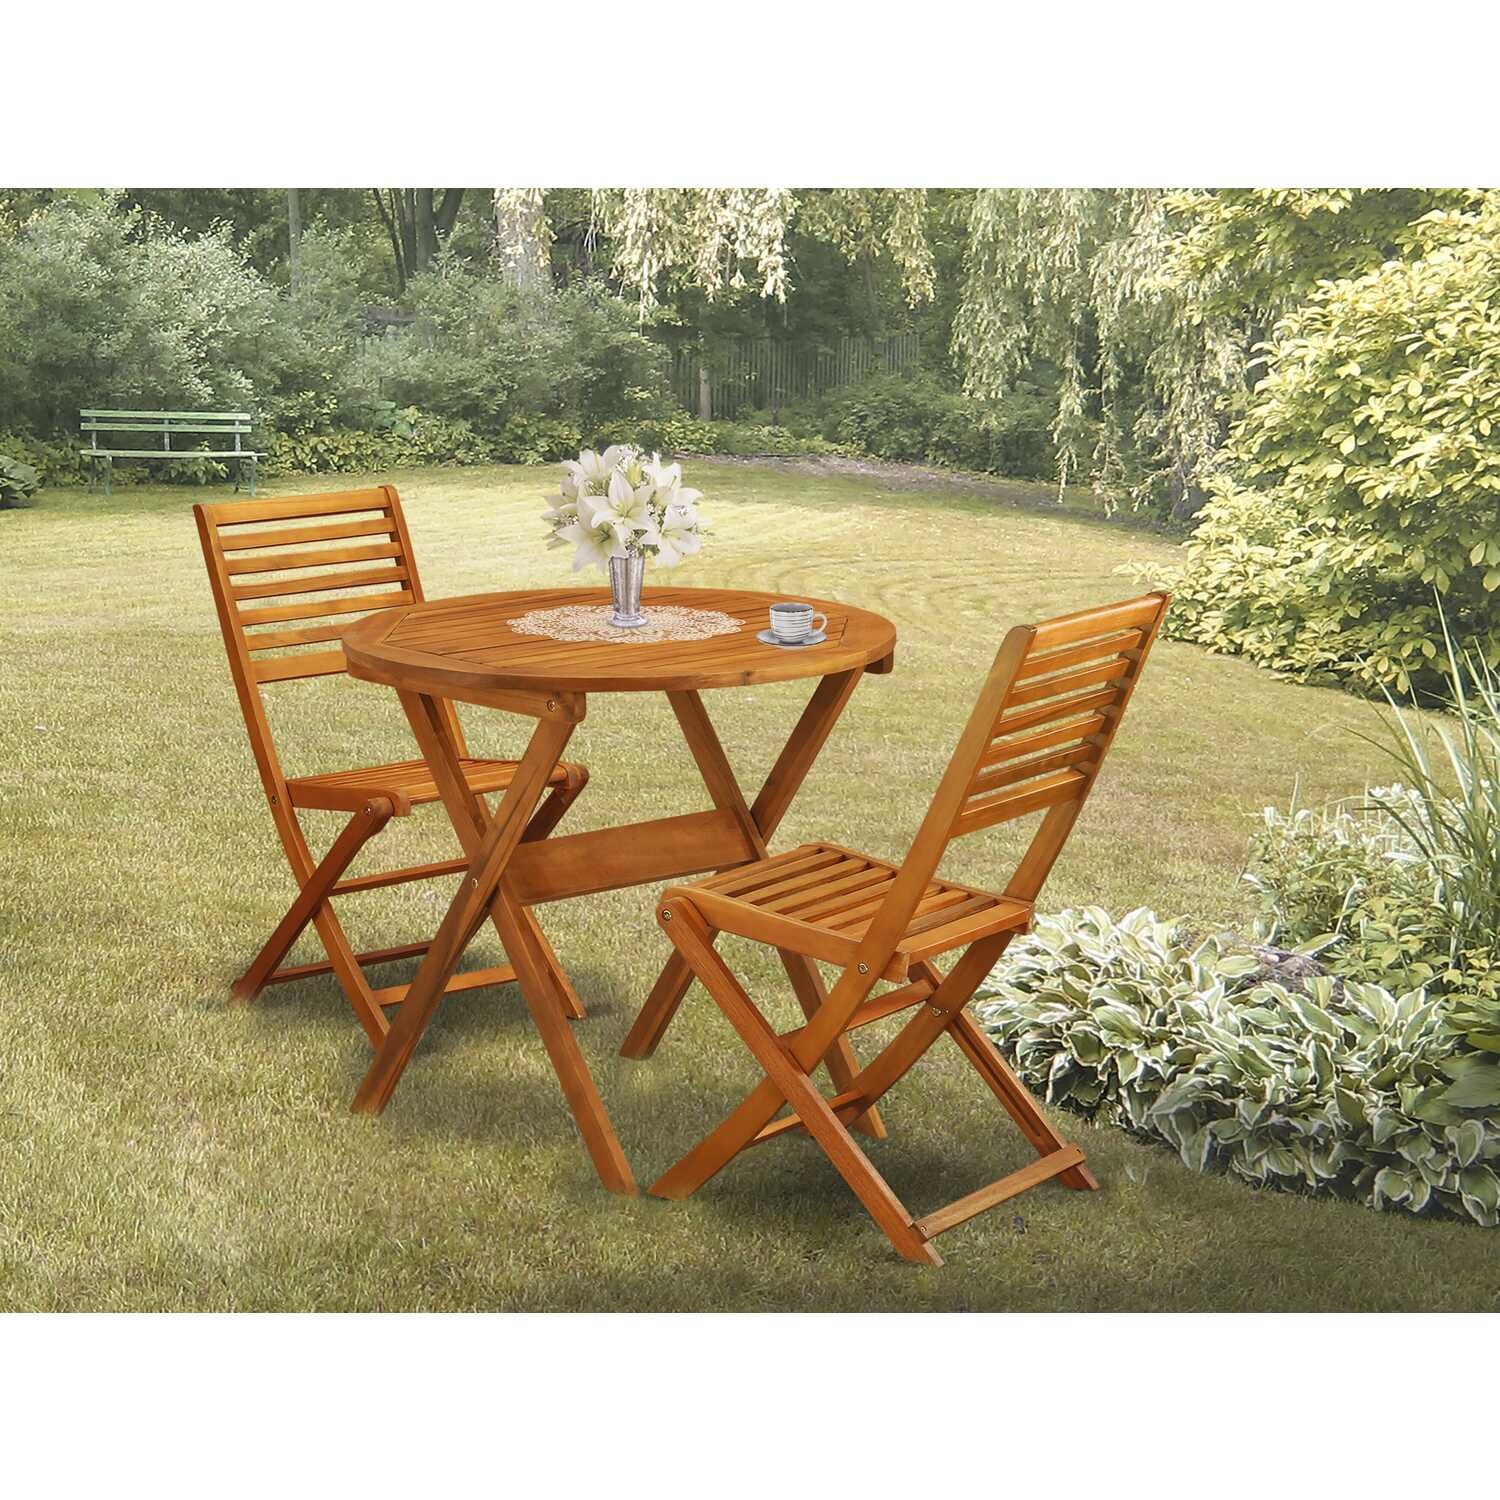 East West Furniture 3-Piece Folding Patio Set Contains a Folding Patio Table and 2 Outdoor Bistro Chairs Suitable for Garden, Terrace, Bistro, and Porch - Natural Oil Finish - image 5 of 6